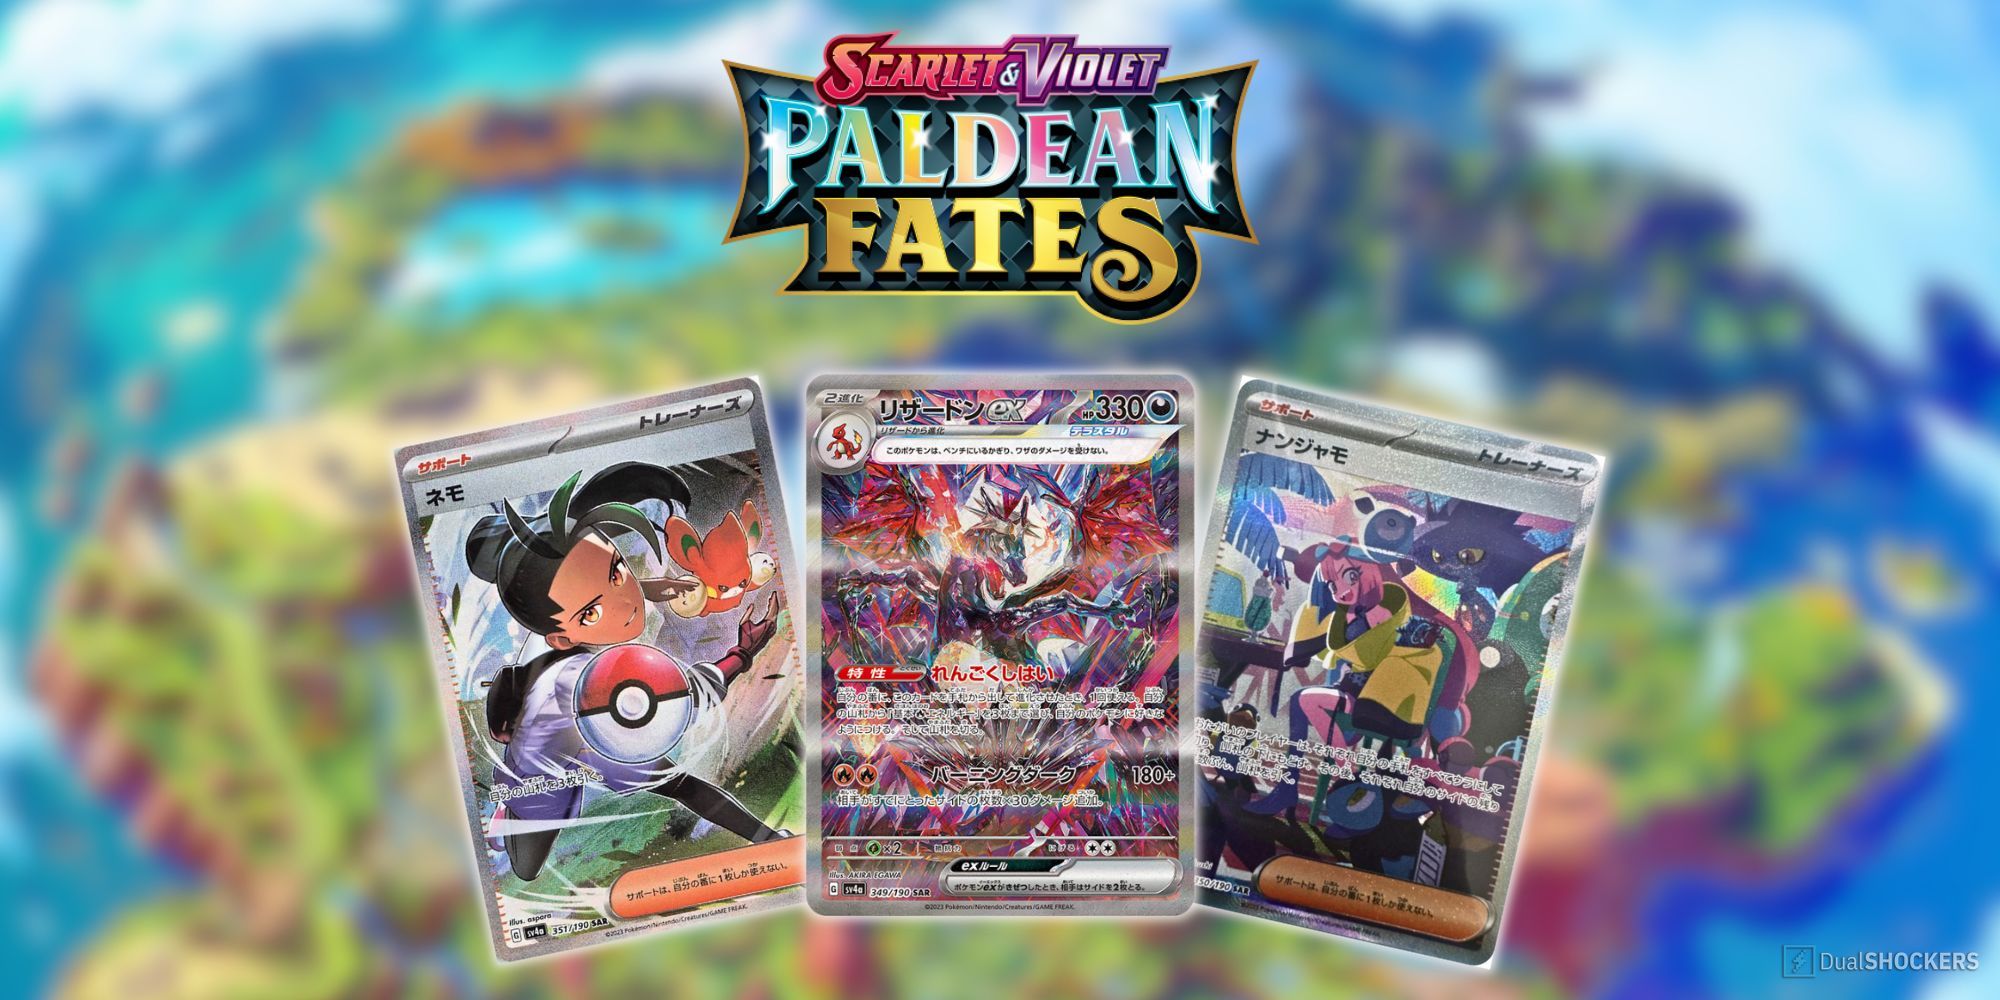 Feature image with three Secret Rare cards from Paldean Fates on a blurry map background under the logo.